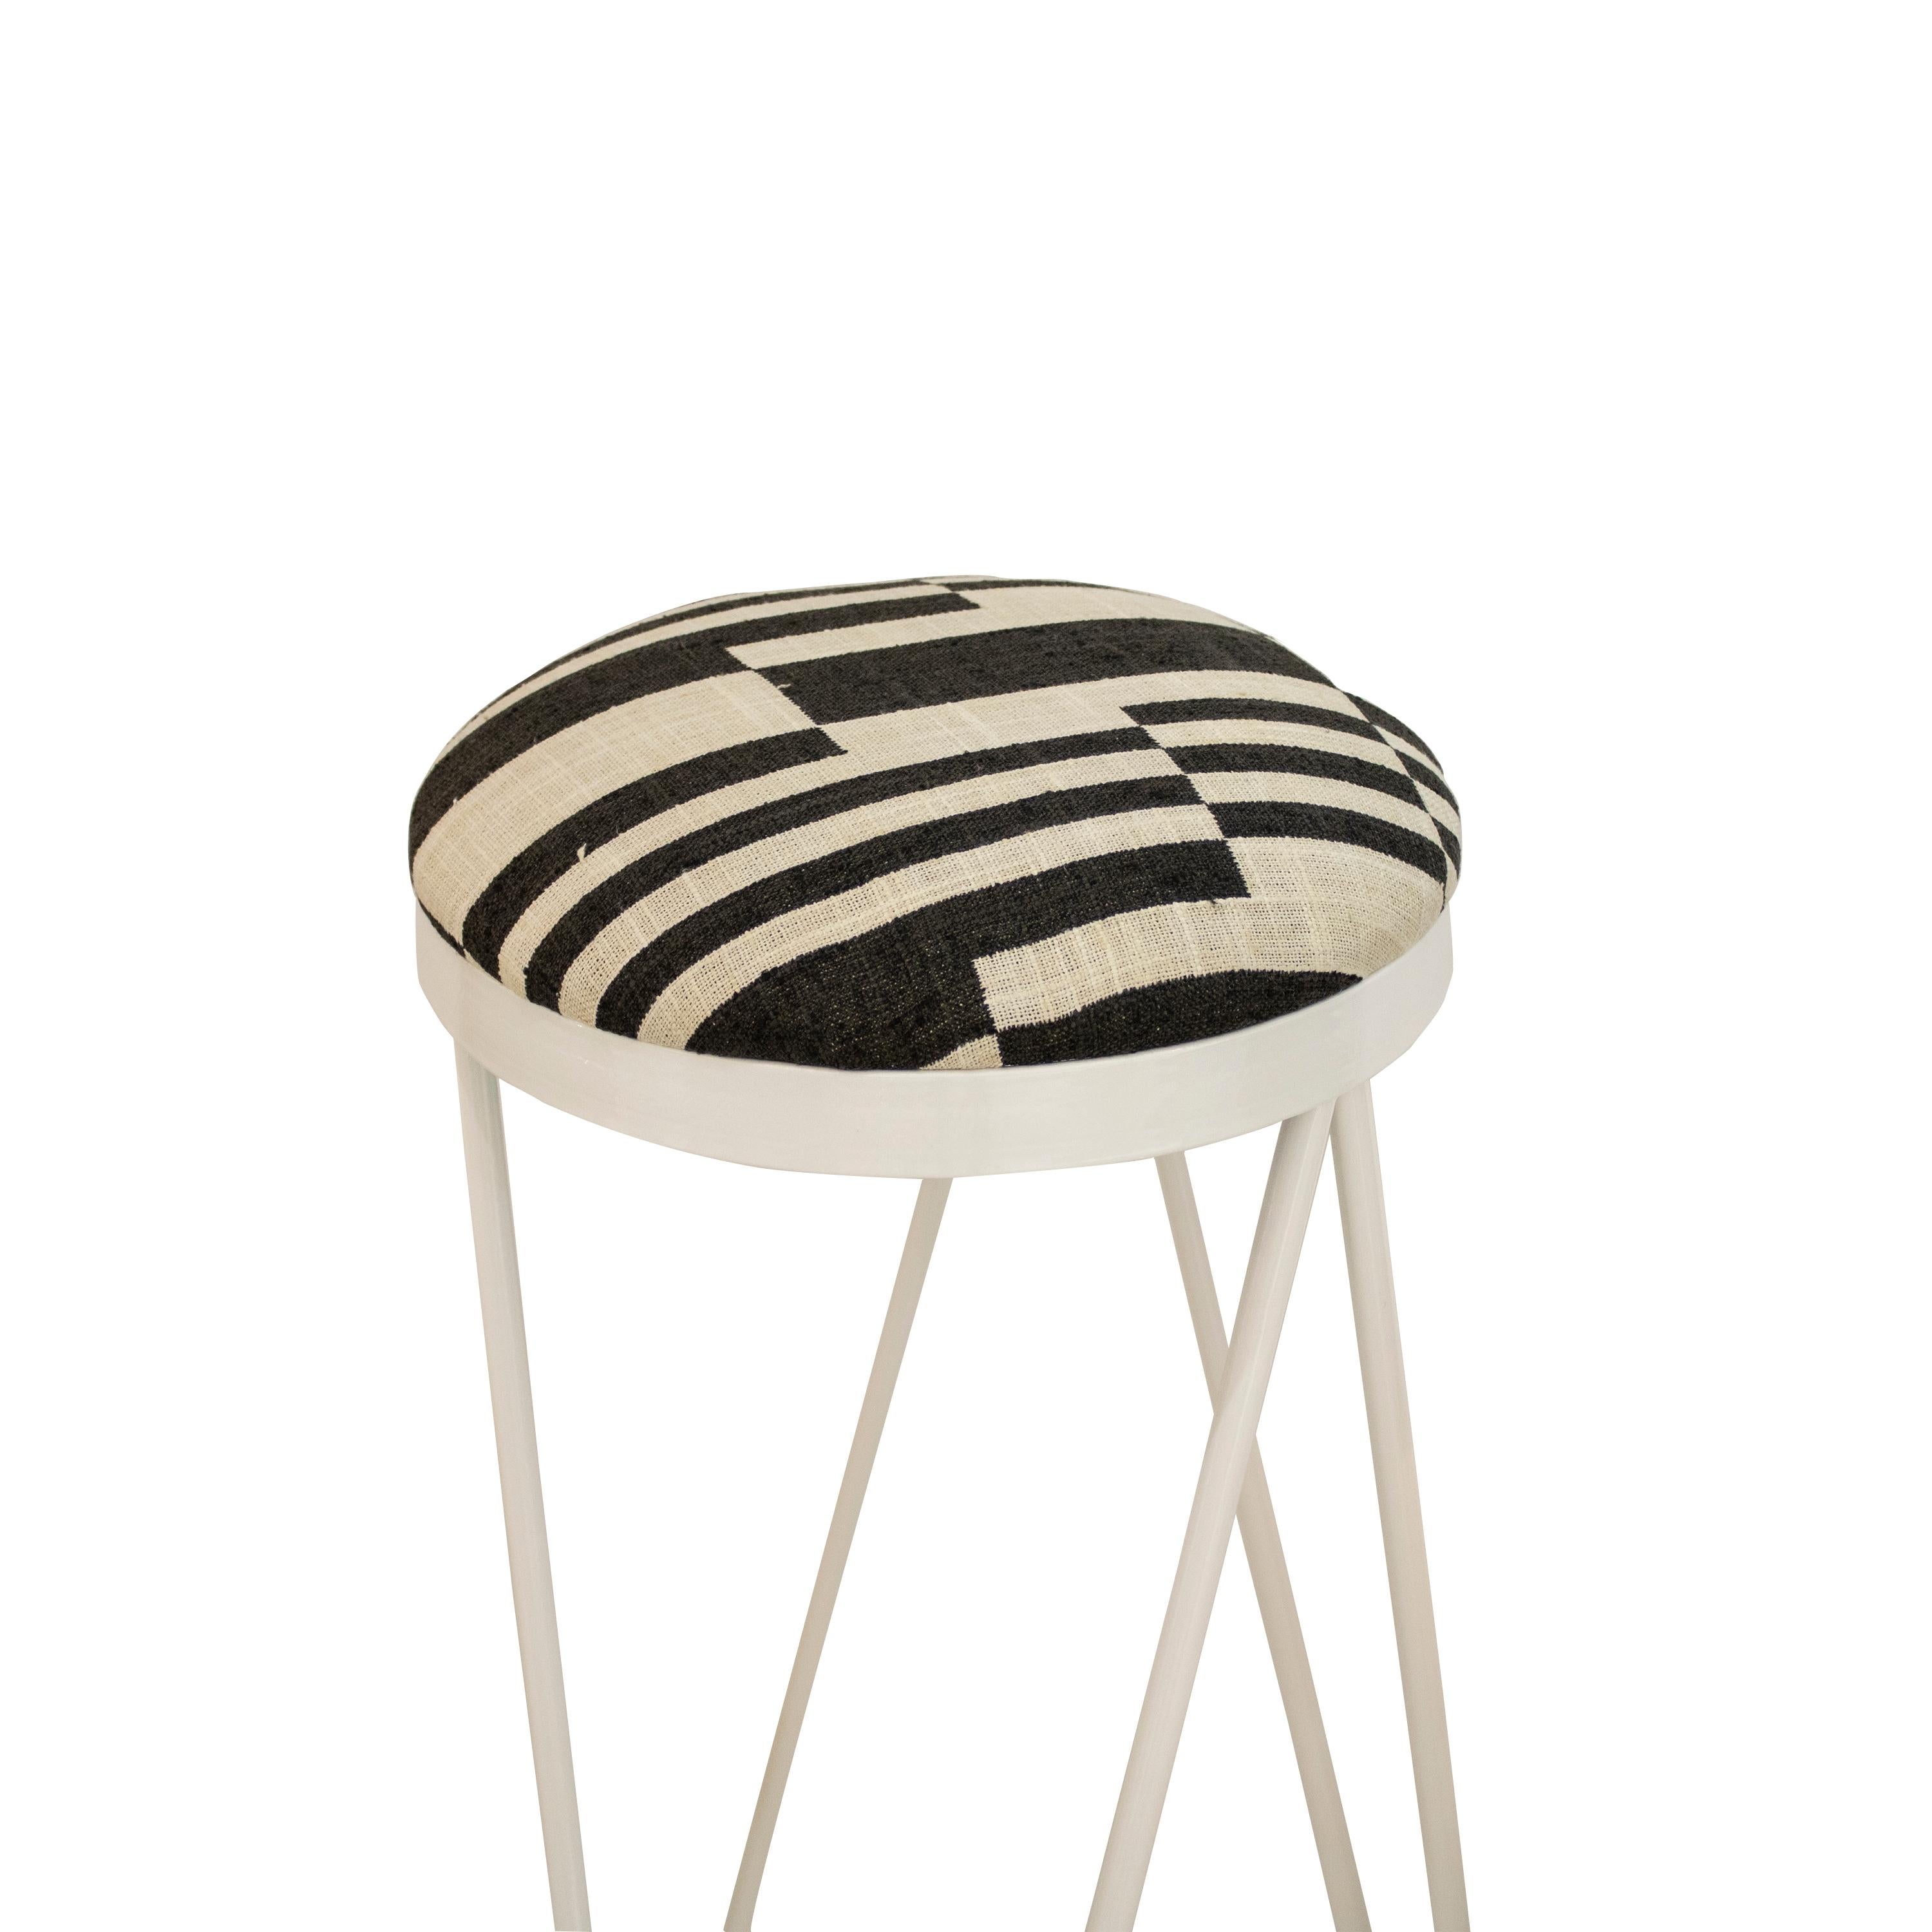 Contemporary bar stool designed by ikb191 studio in a limited edition. It consists of a white lacquered steel structure, and a foam seat, upholstered in black and white linen embroidered. Manufacture in Spain 2022.